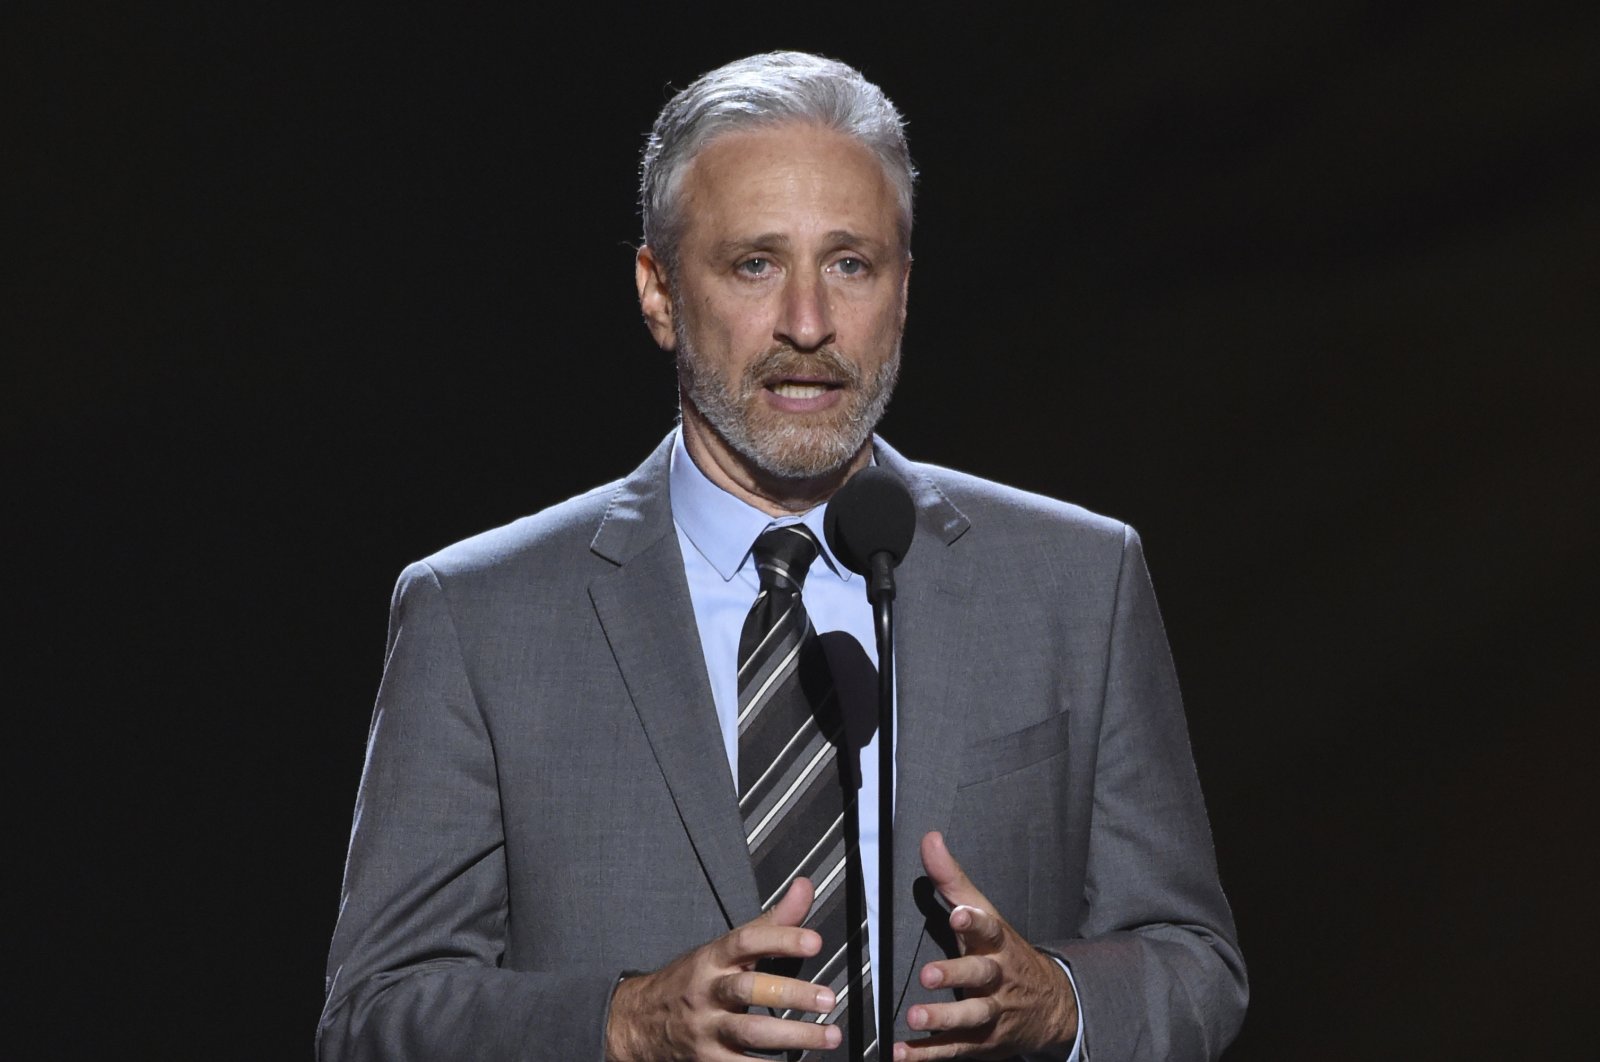 Jon Stewart presents the Pat Tillman award for service on July 18, 2018, at the ESPY Awards in Los Angeles, U.S. (AP Photo)